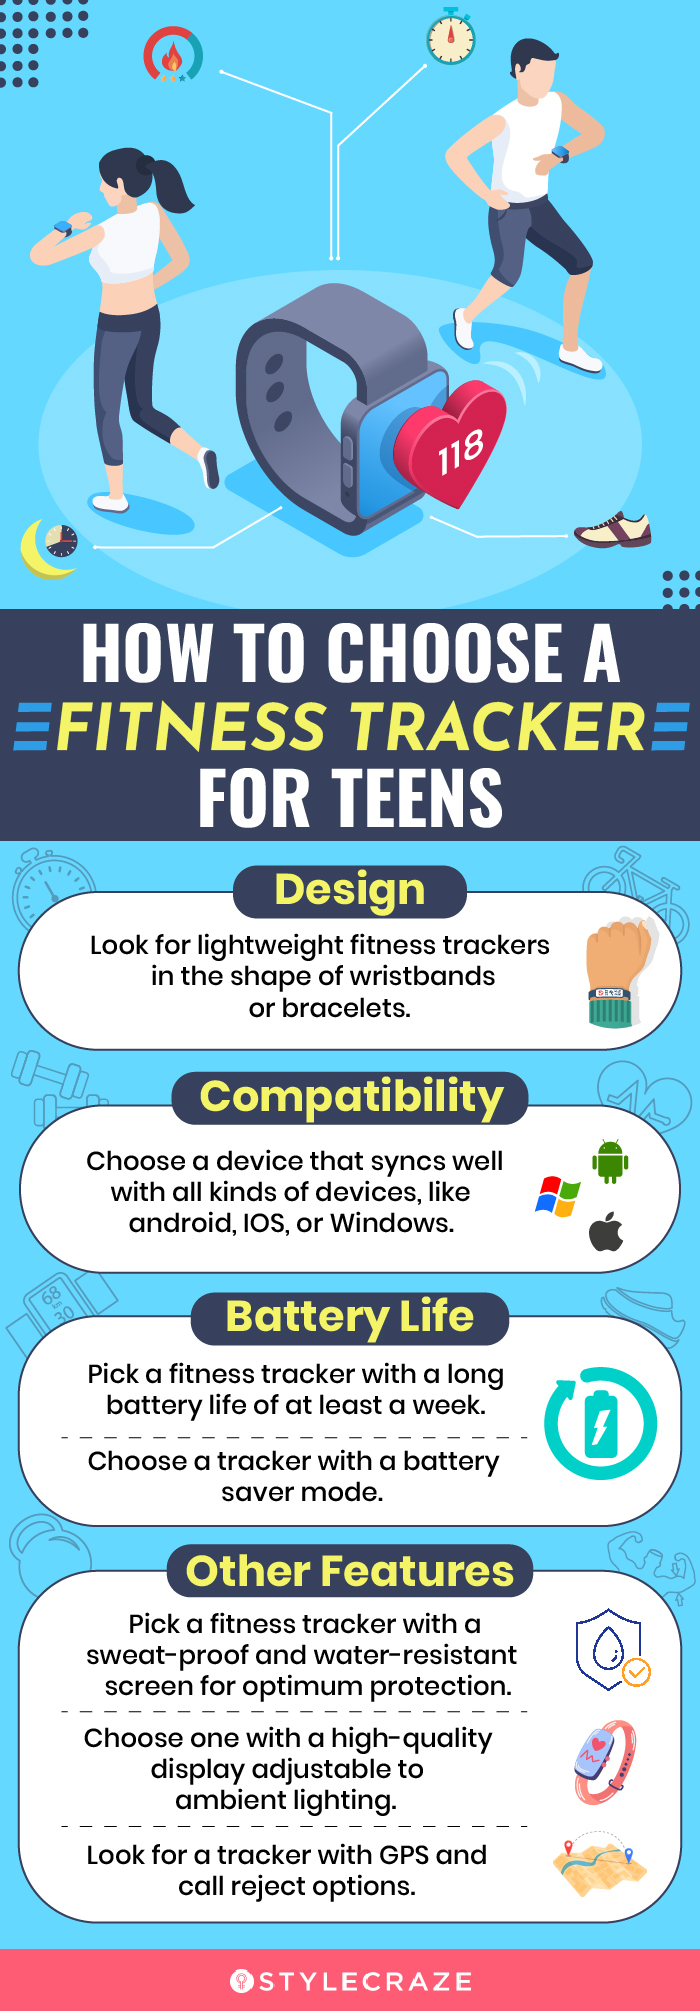 How To Choose A Fitness Tracker For Teens (infographic)